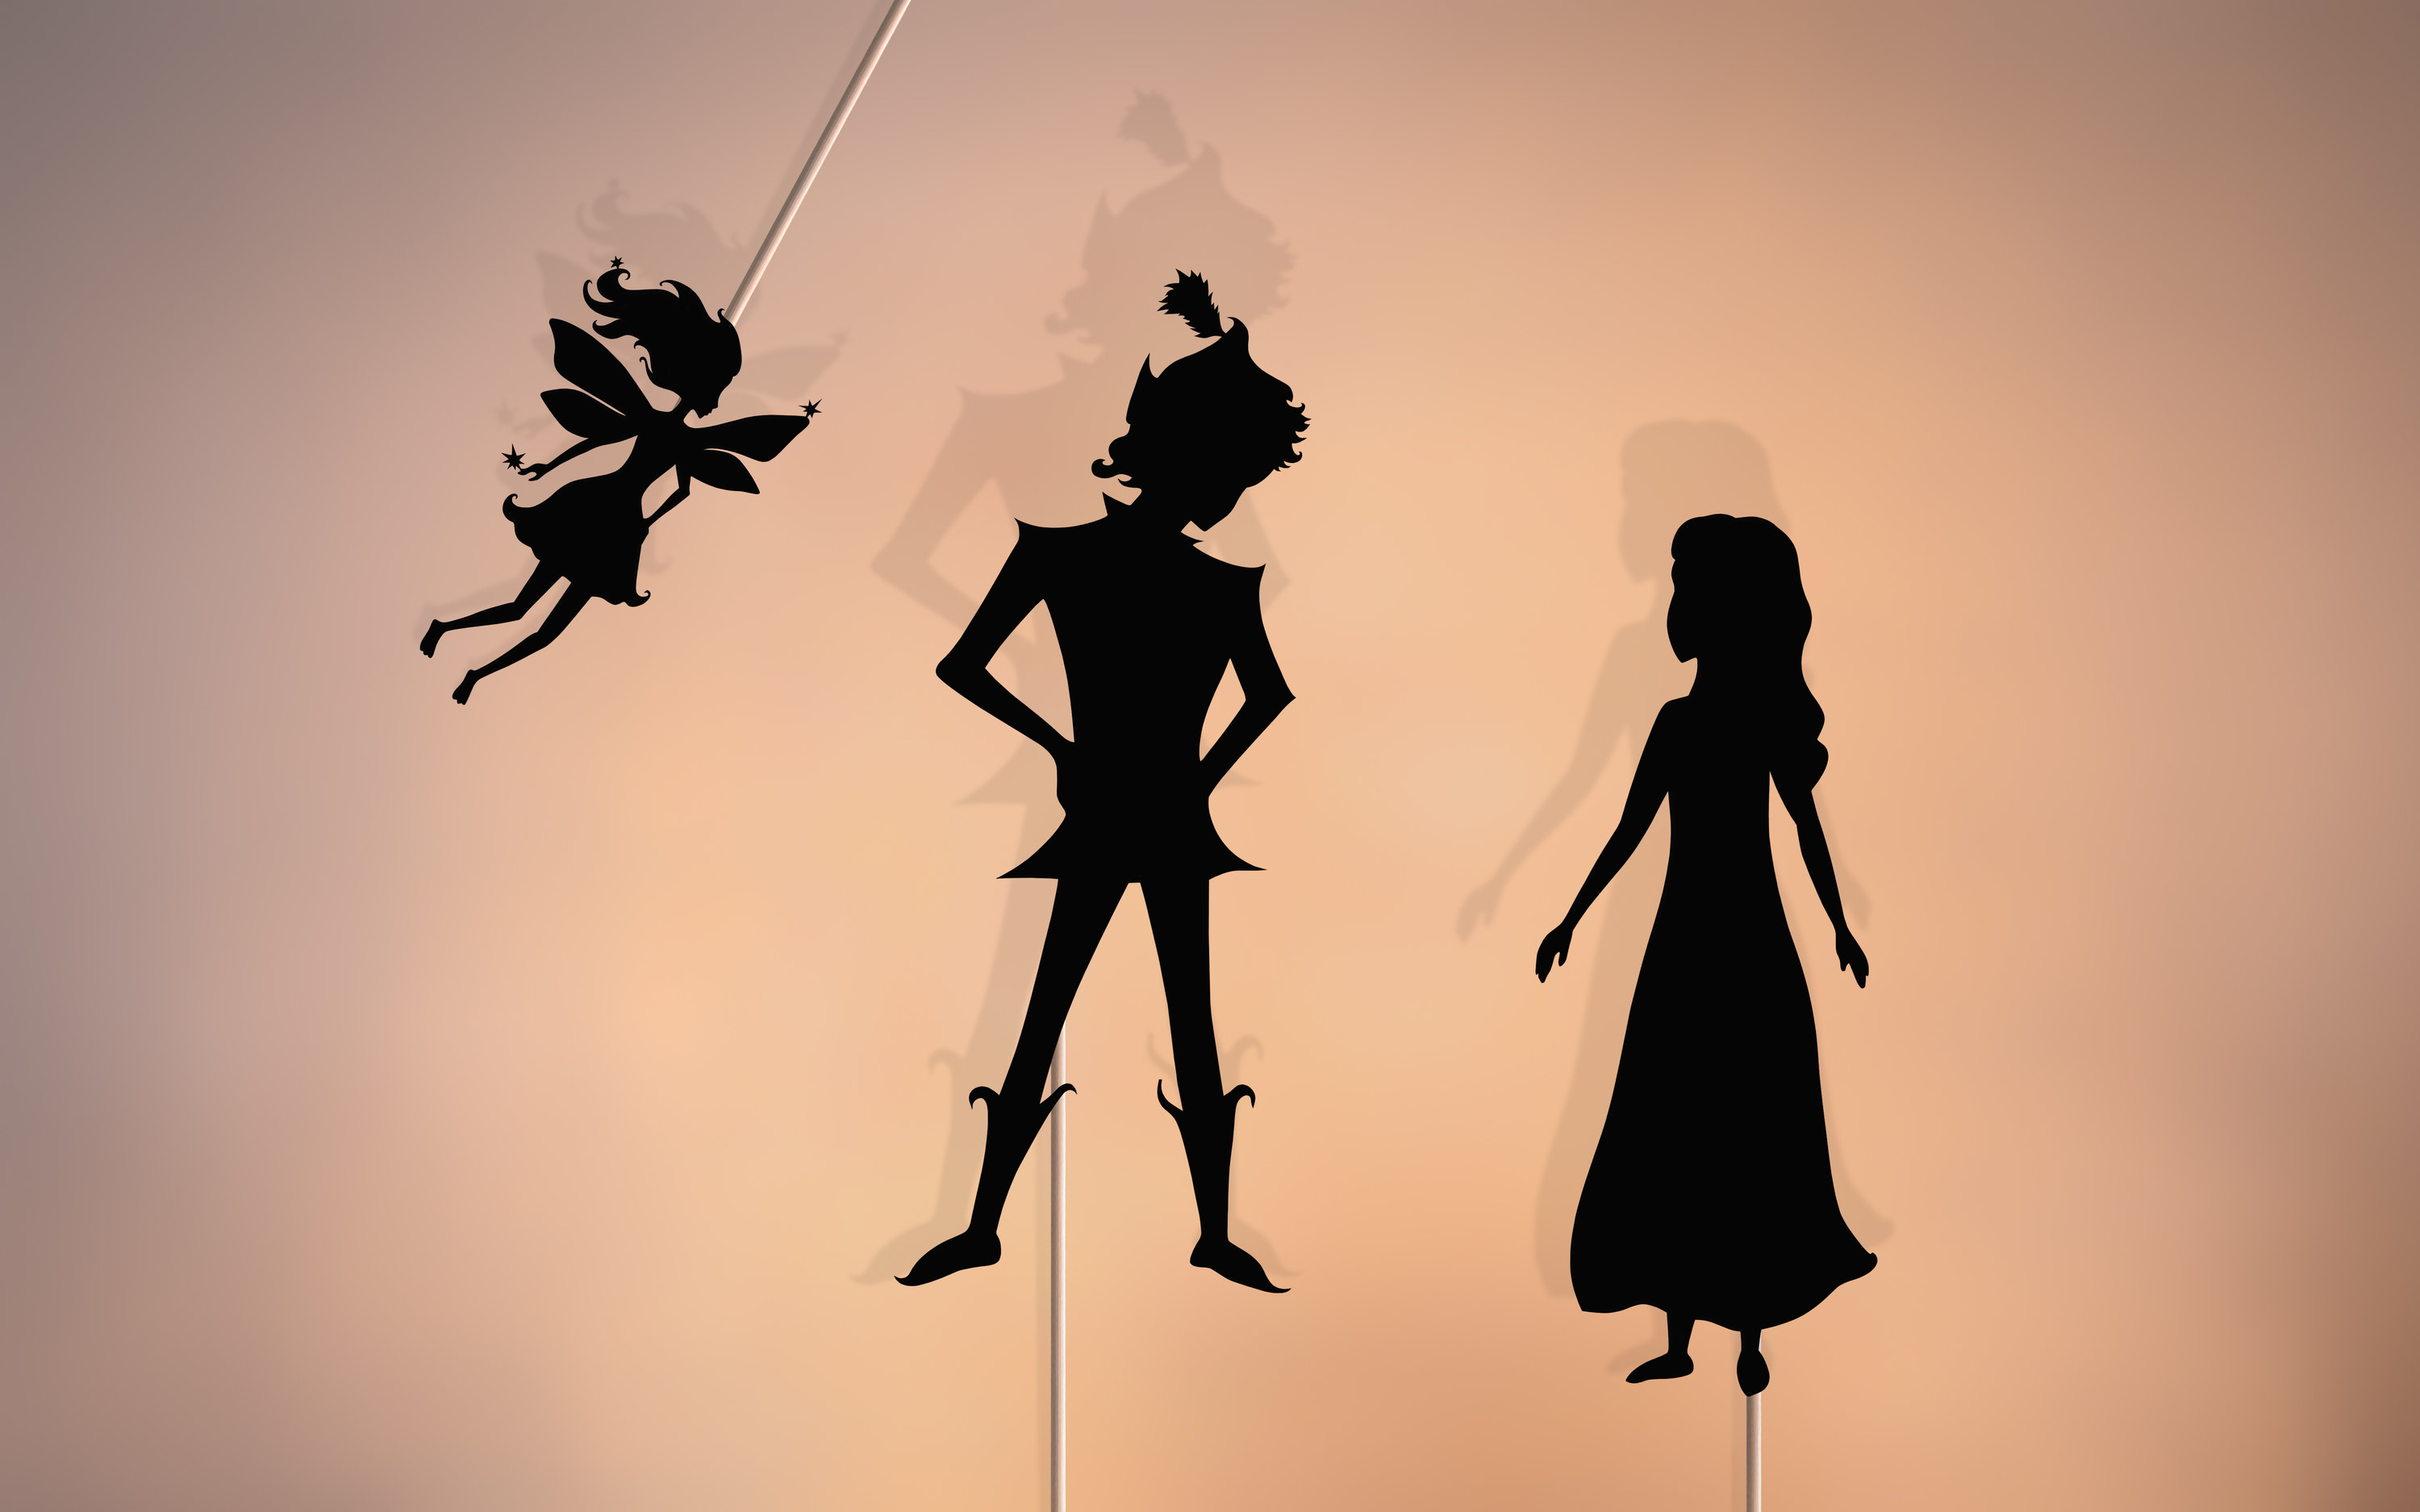 Silhouette of Peter Pan, Wendy, and Tinkerbell